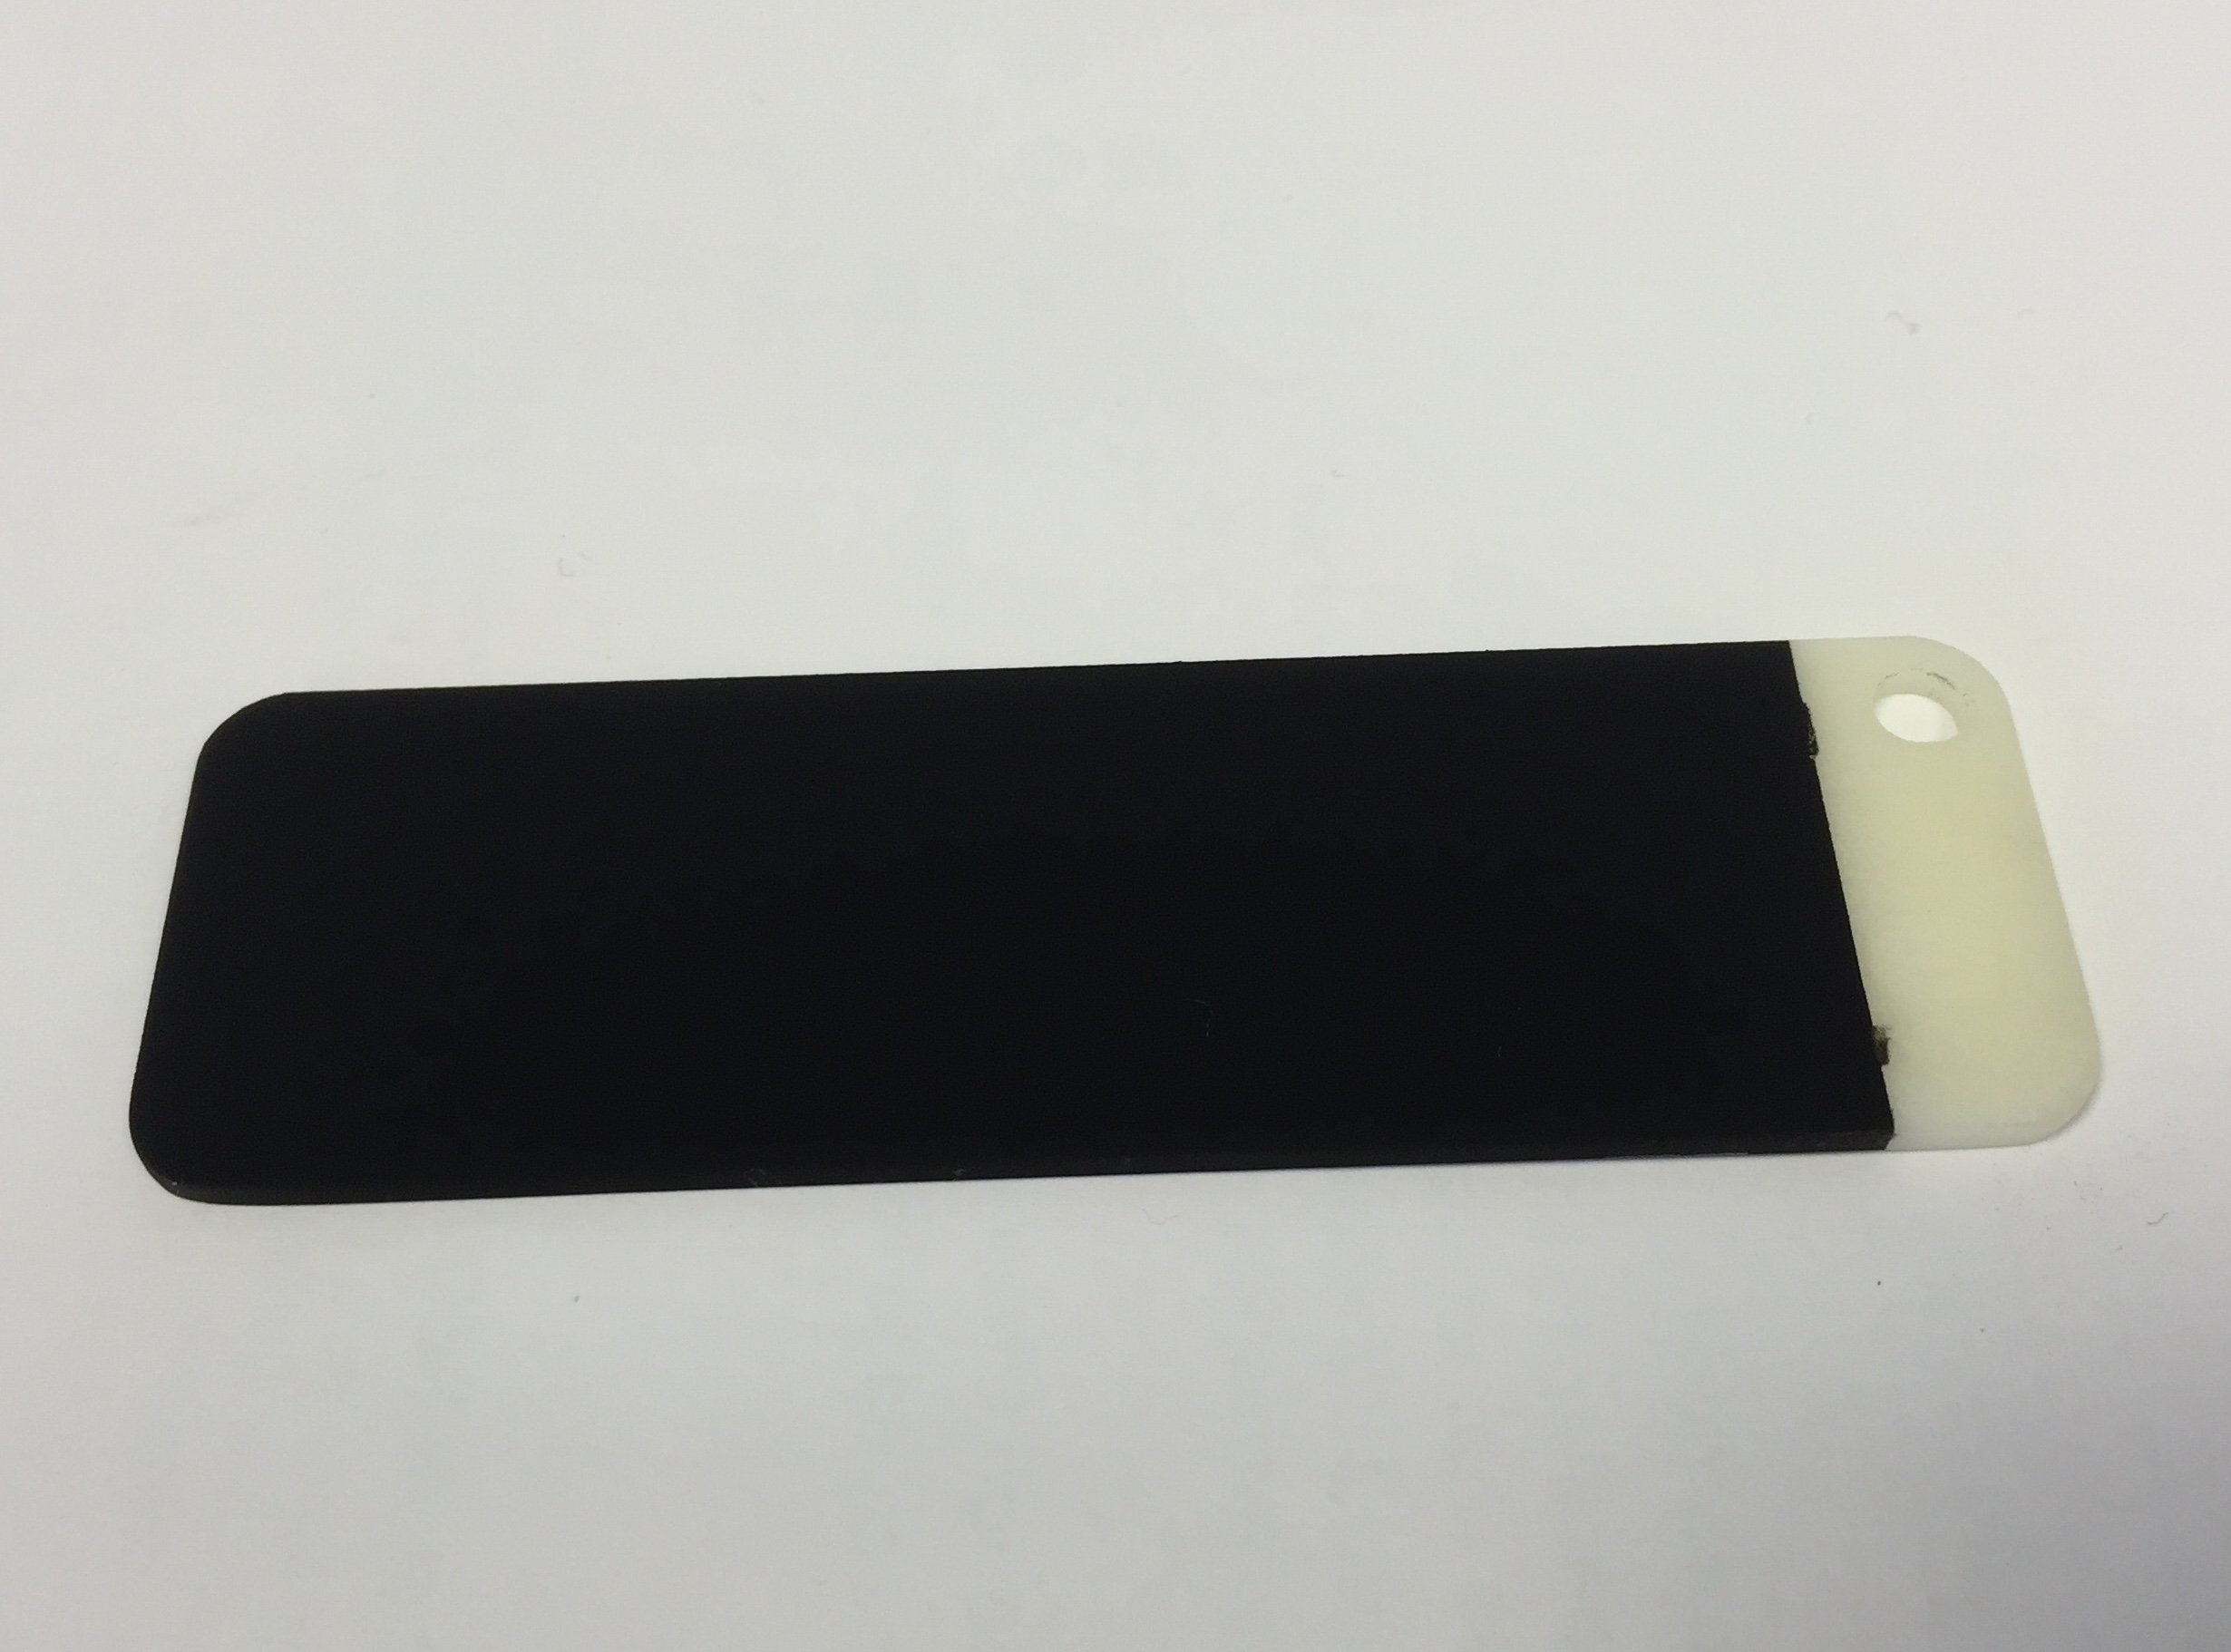  The world's first 3D print coated with Vantablack, the darkest material known 